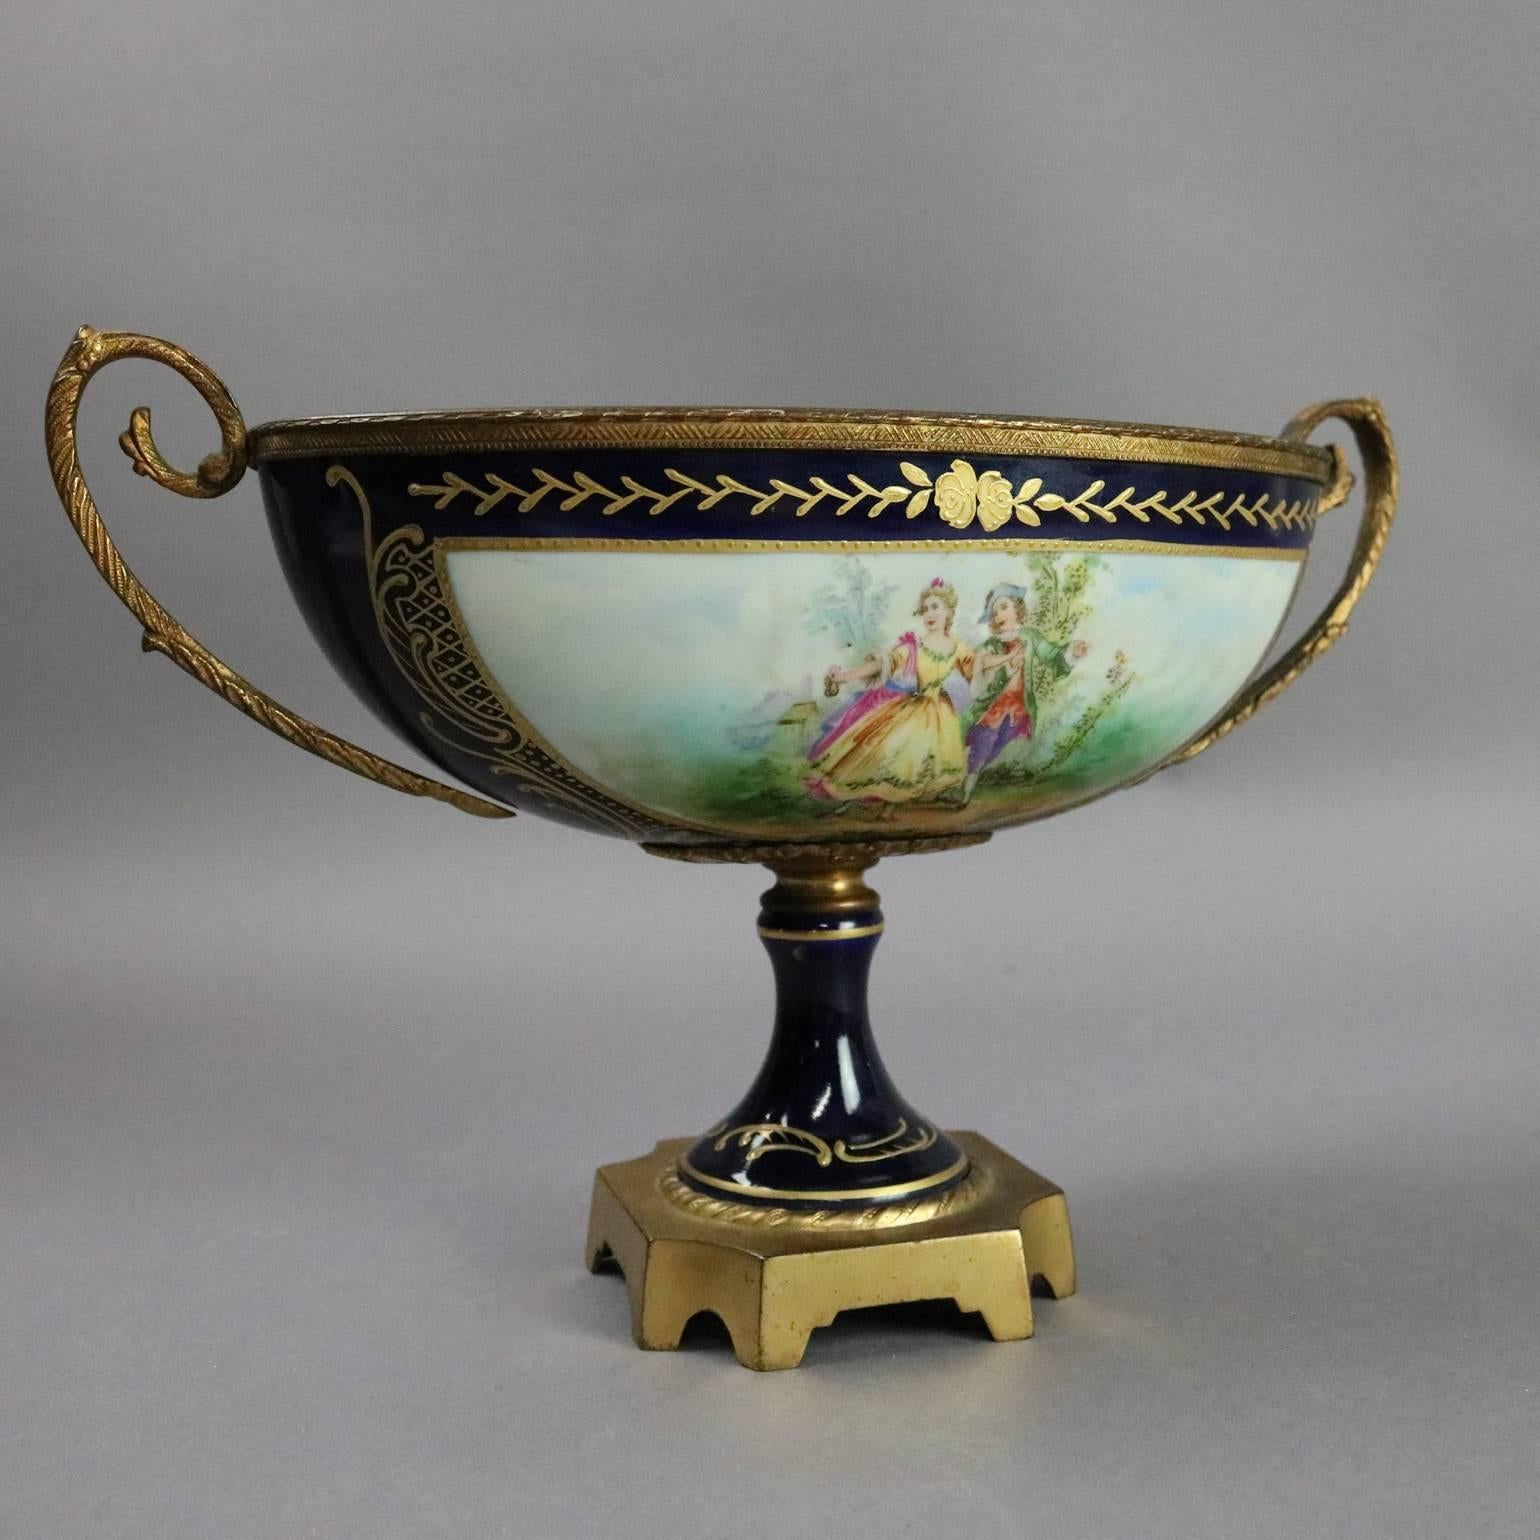 Antique French porcelain Sevres style double handle compote features hand-painted courting scene reserve artist signed Sigfried, gilt foliate decorations, bronzed white metal mounts, circa 1880

Measures: 7.5" H x 11" W x 5" D.
 